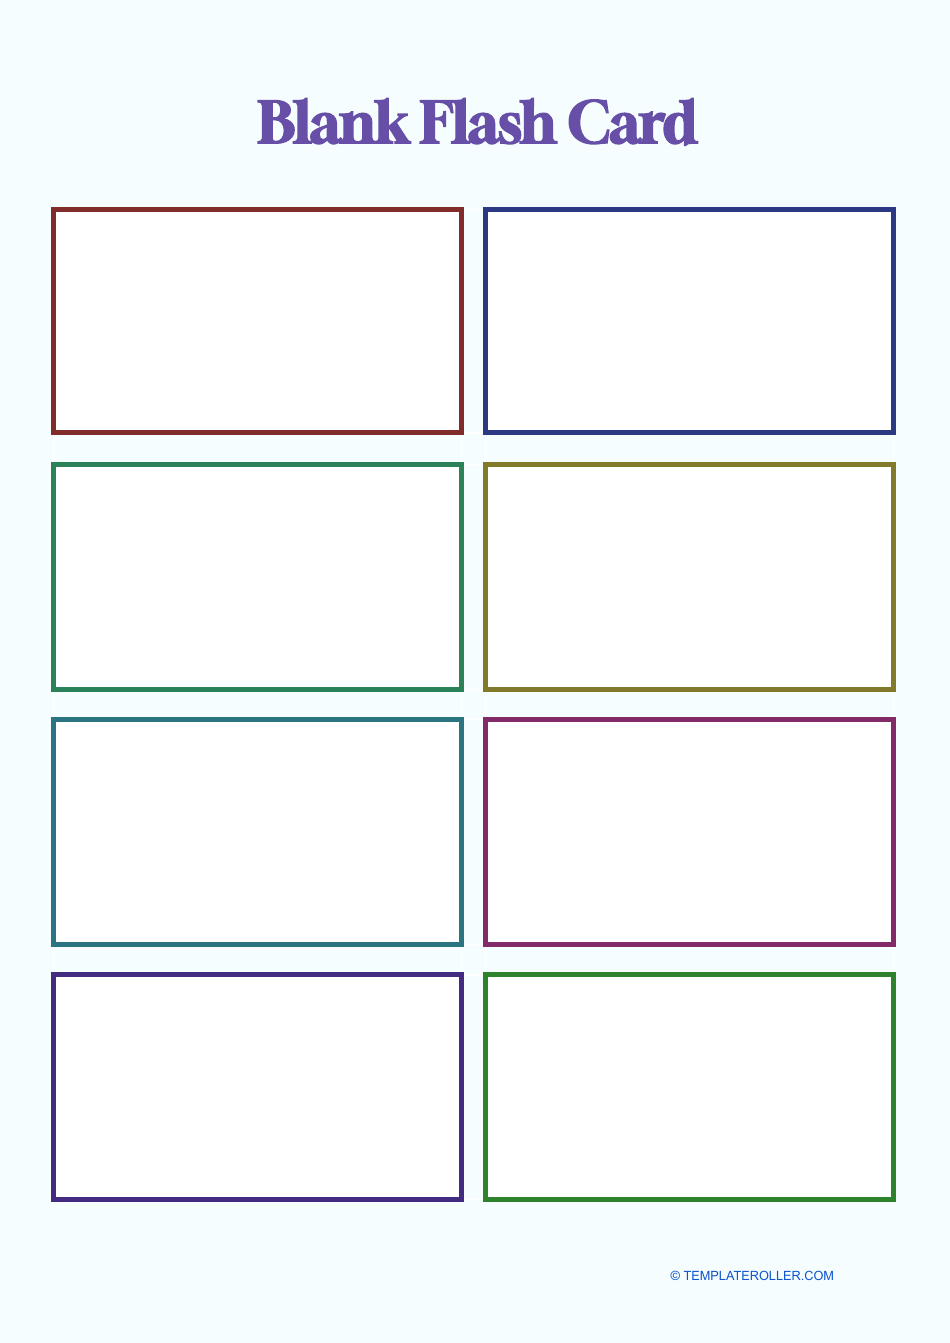 Blank Flash Card Template - An image preview of a customizable and printable blank flash card template.